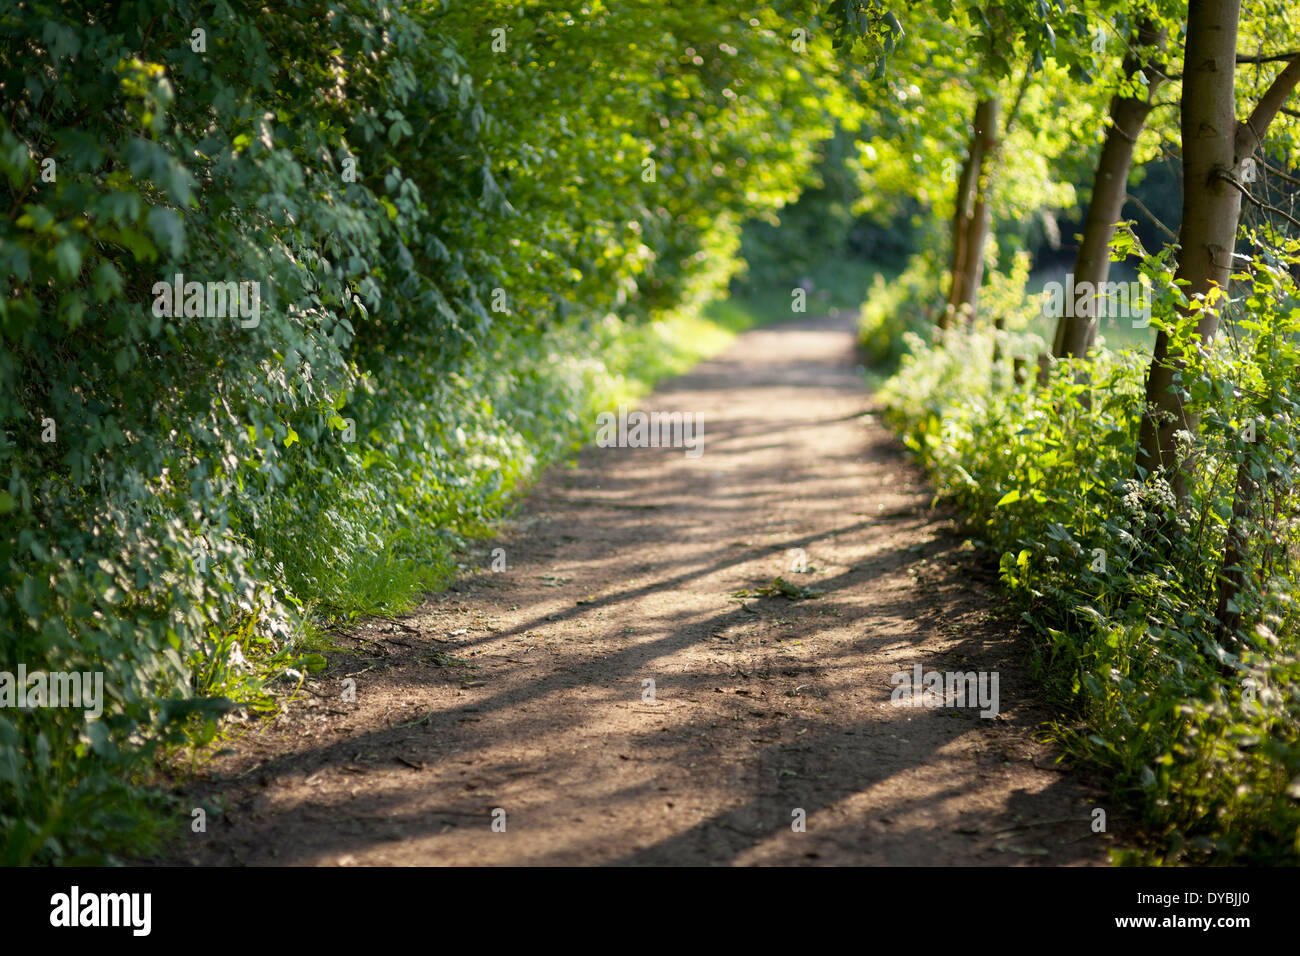 Dirt road leading of the trees into the sun with selective focus. Stock Photo